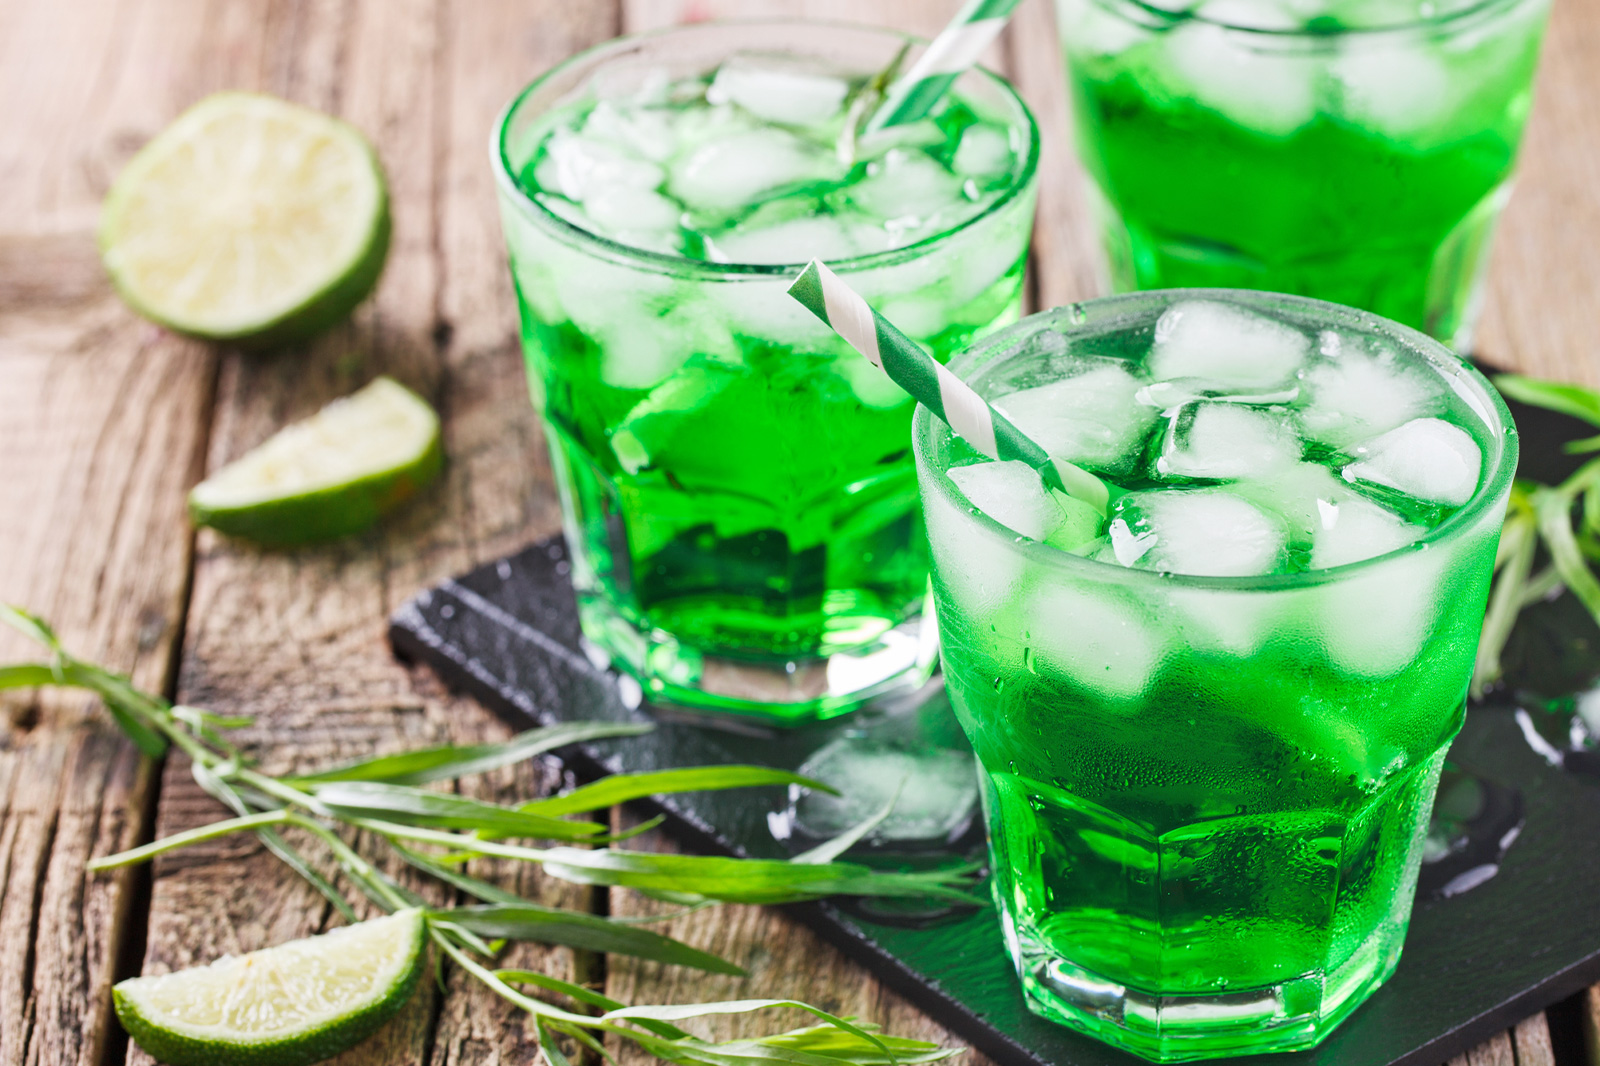 What Irish Mythological Creature Are You? Green cocktails